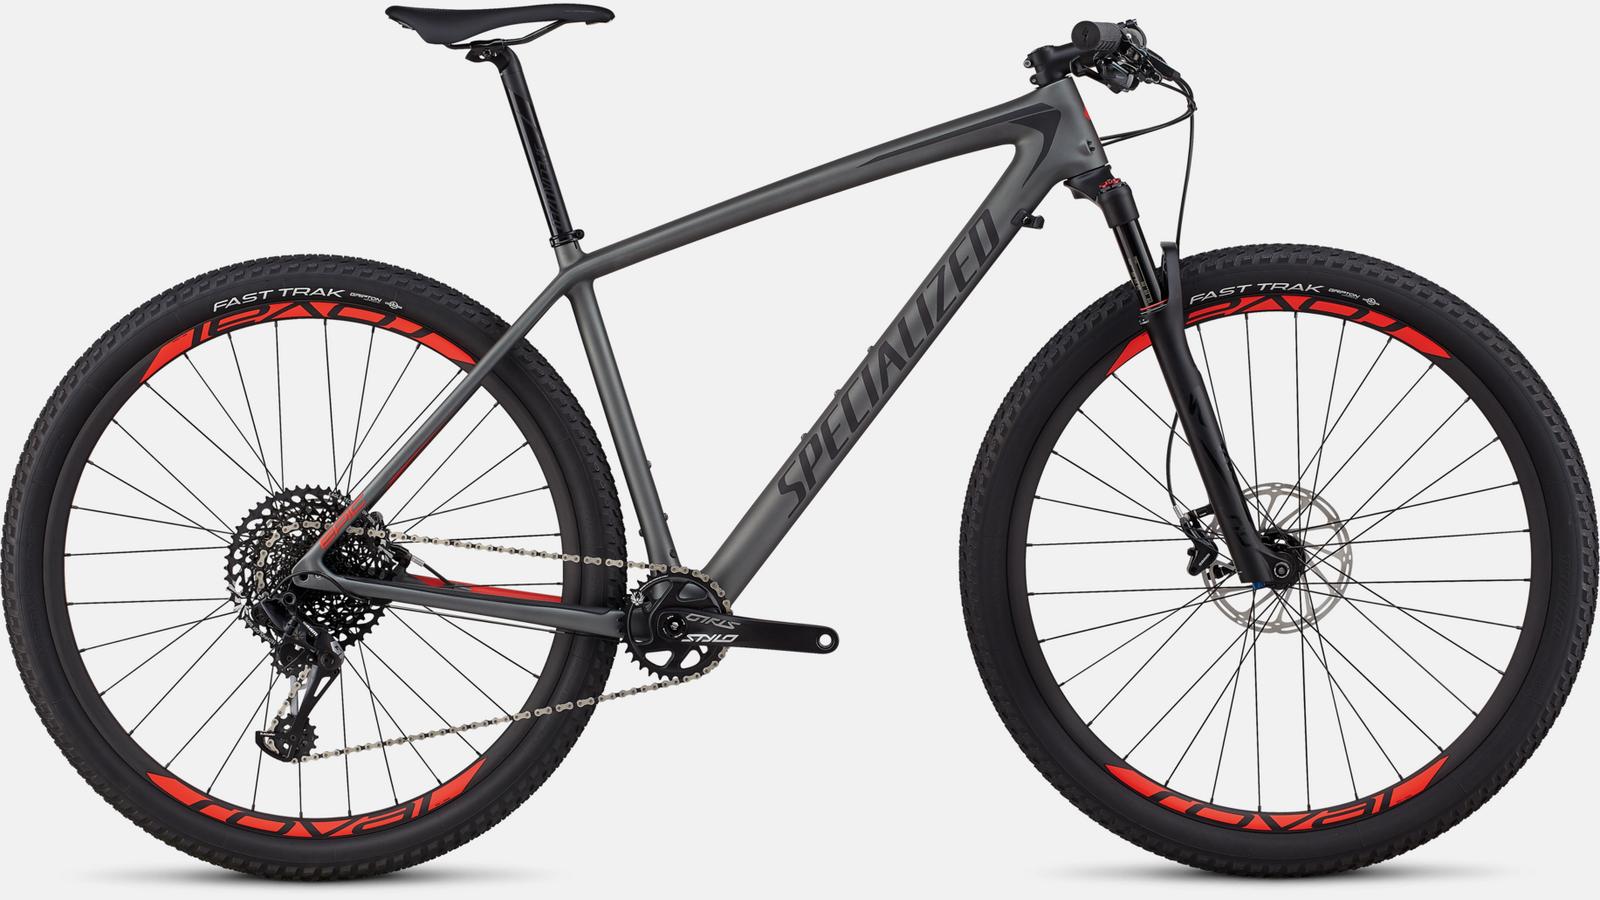 Paint for 2018 Specialized Men's Epic Hardtail Expert - Satin Charcoal